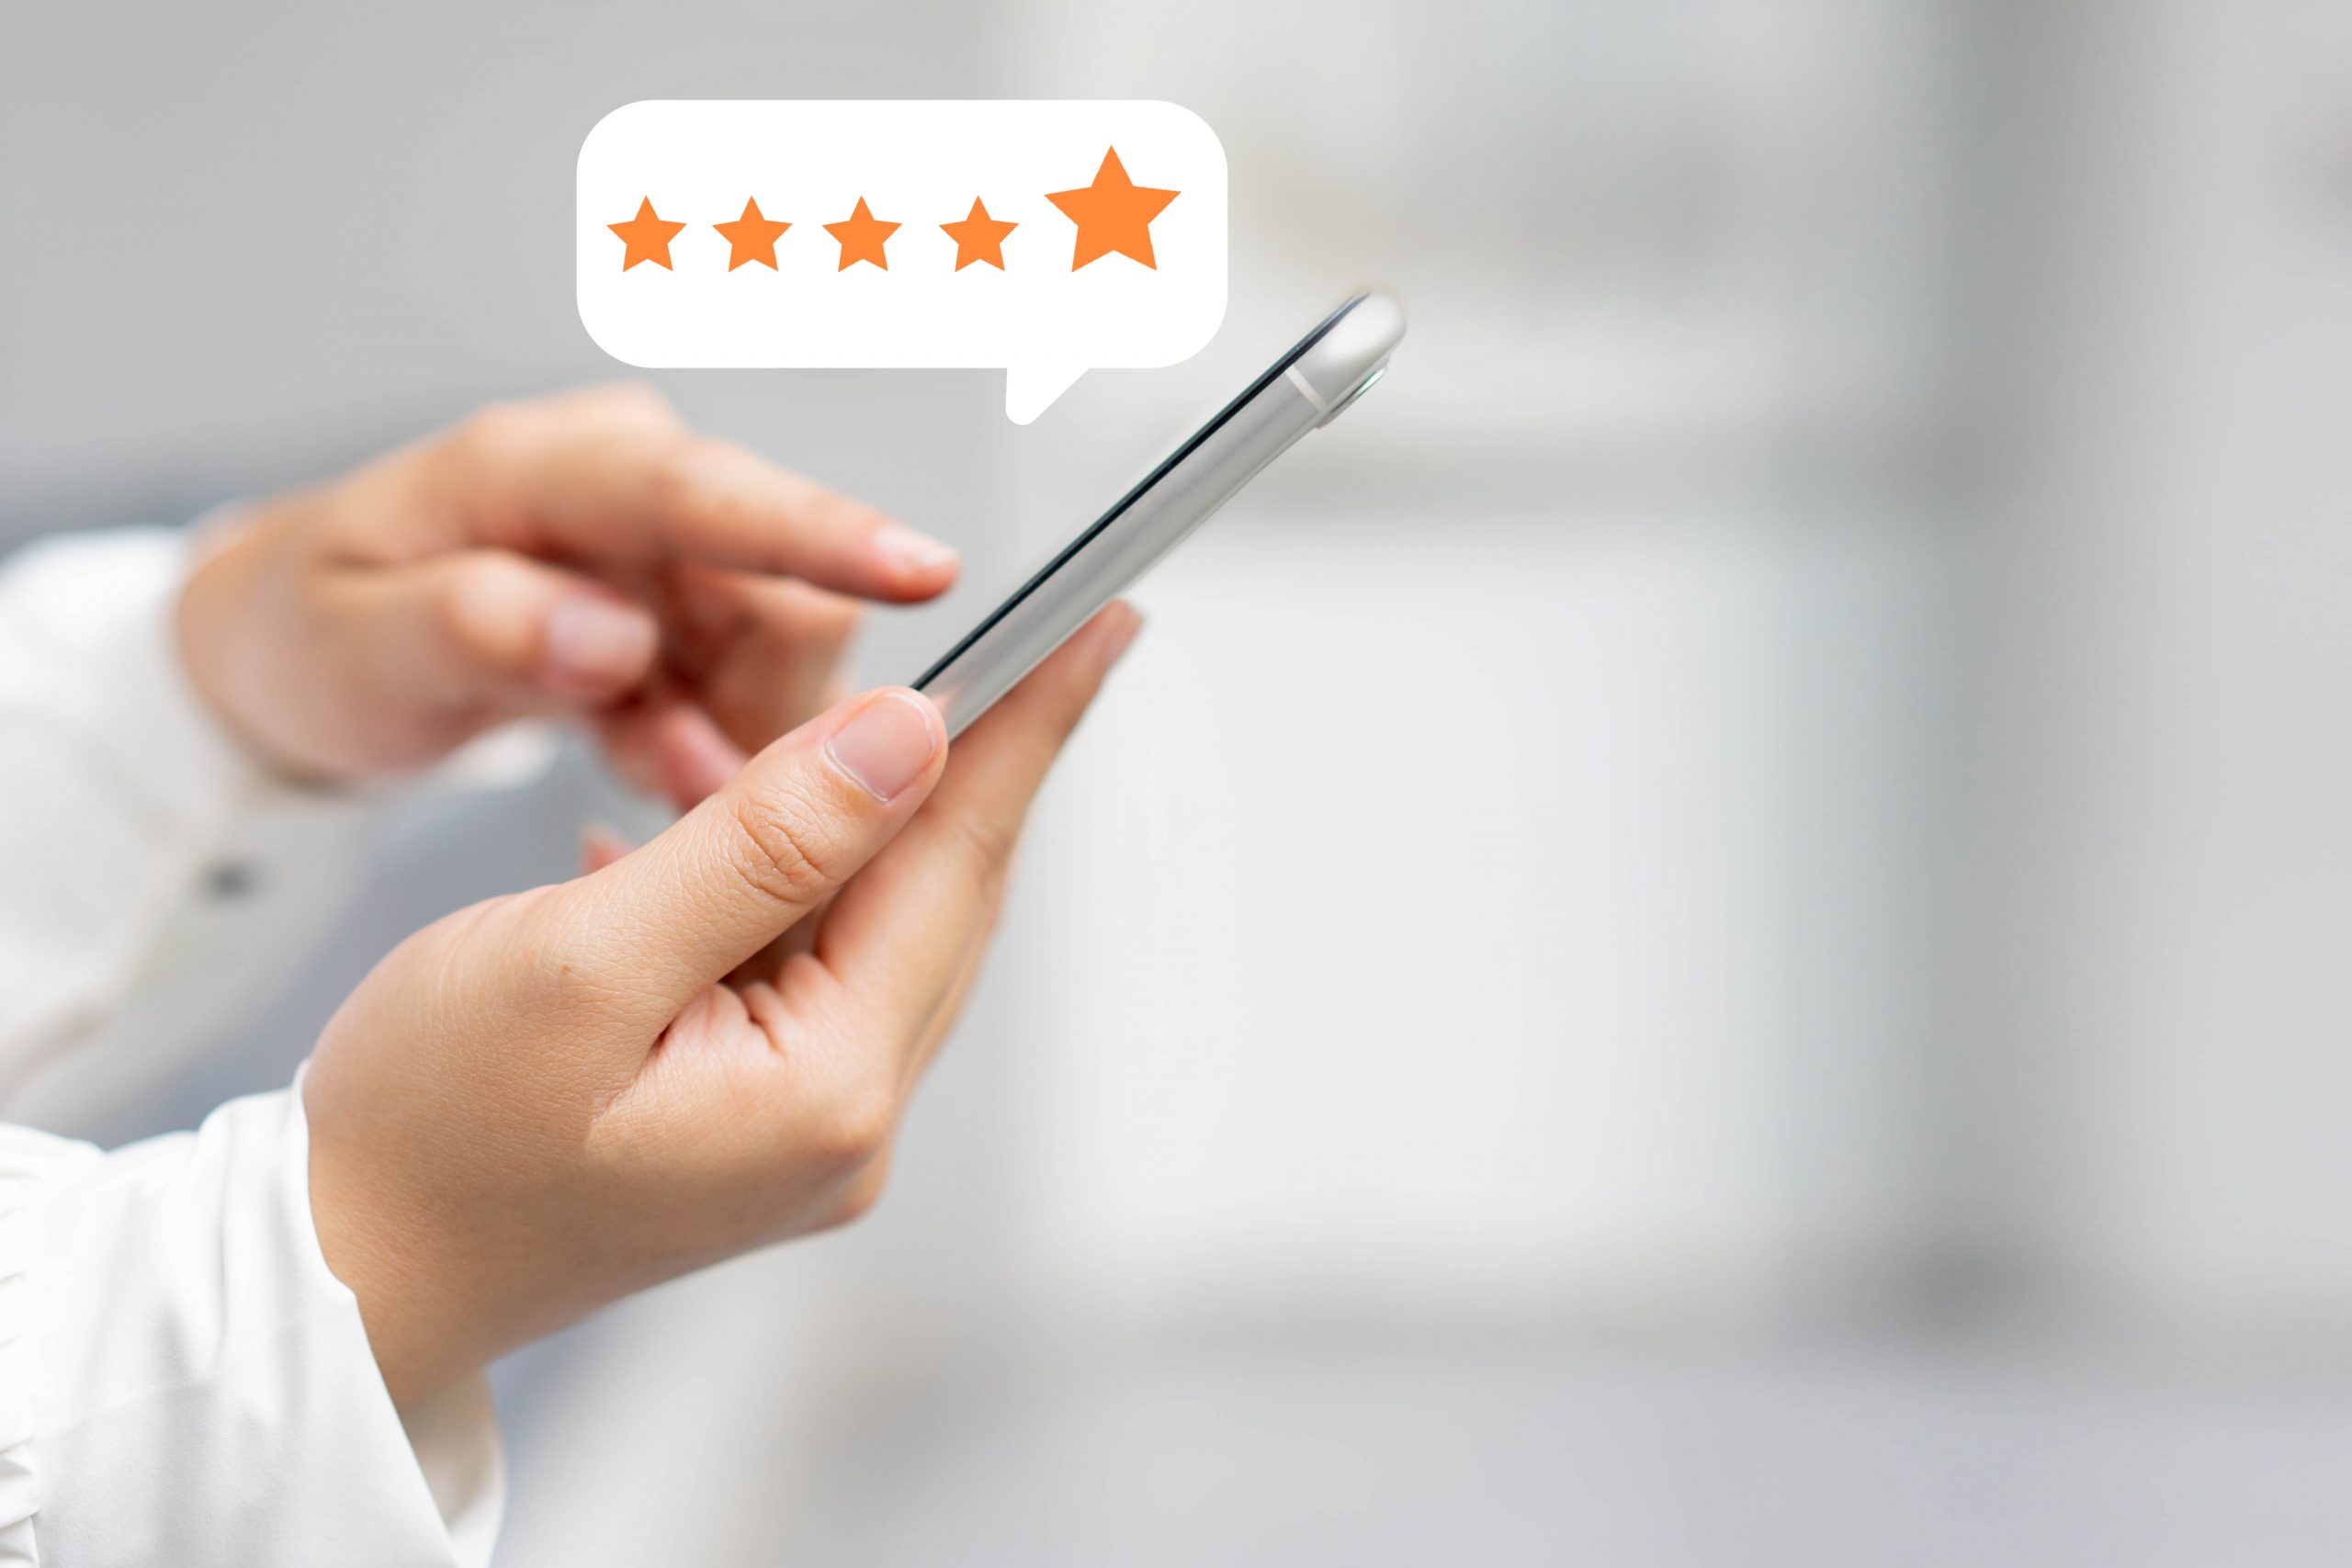 Get five star ratings for your retail dispensary or store location. Say goodbye to negative reviews with our reviews management tool